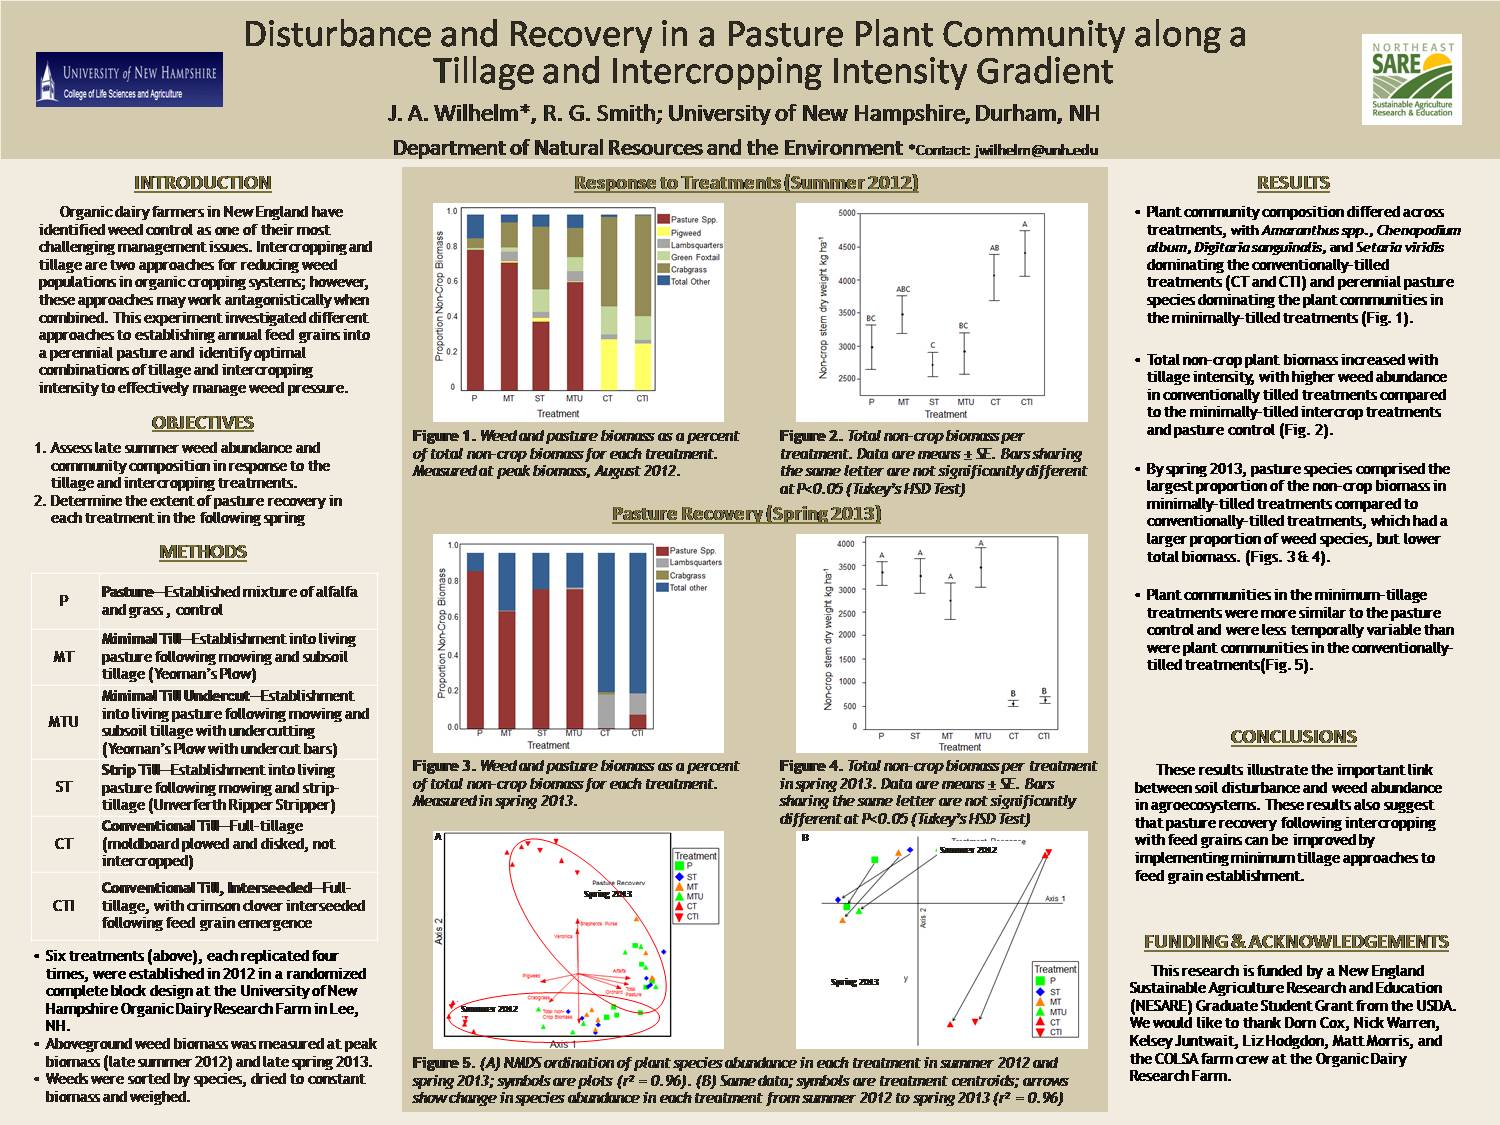 Disturbance And Recovery In A Pasture Plant Community Along A Tillage And Intercropping Intensity Gradient  by jwilhelm